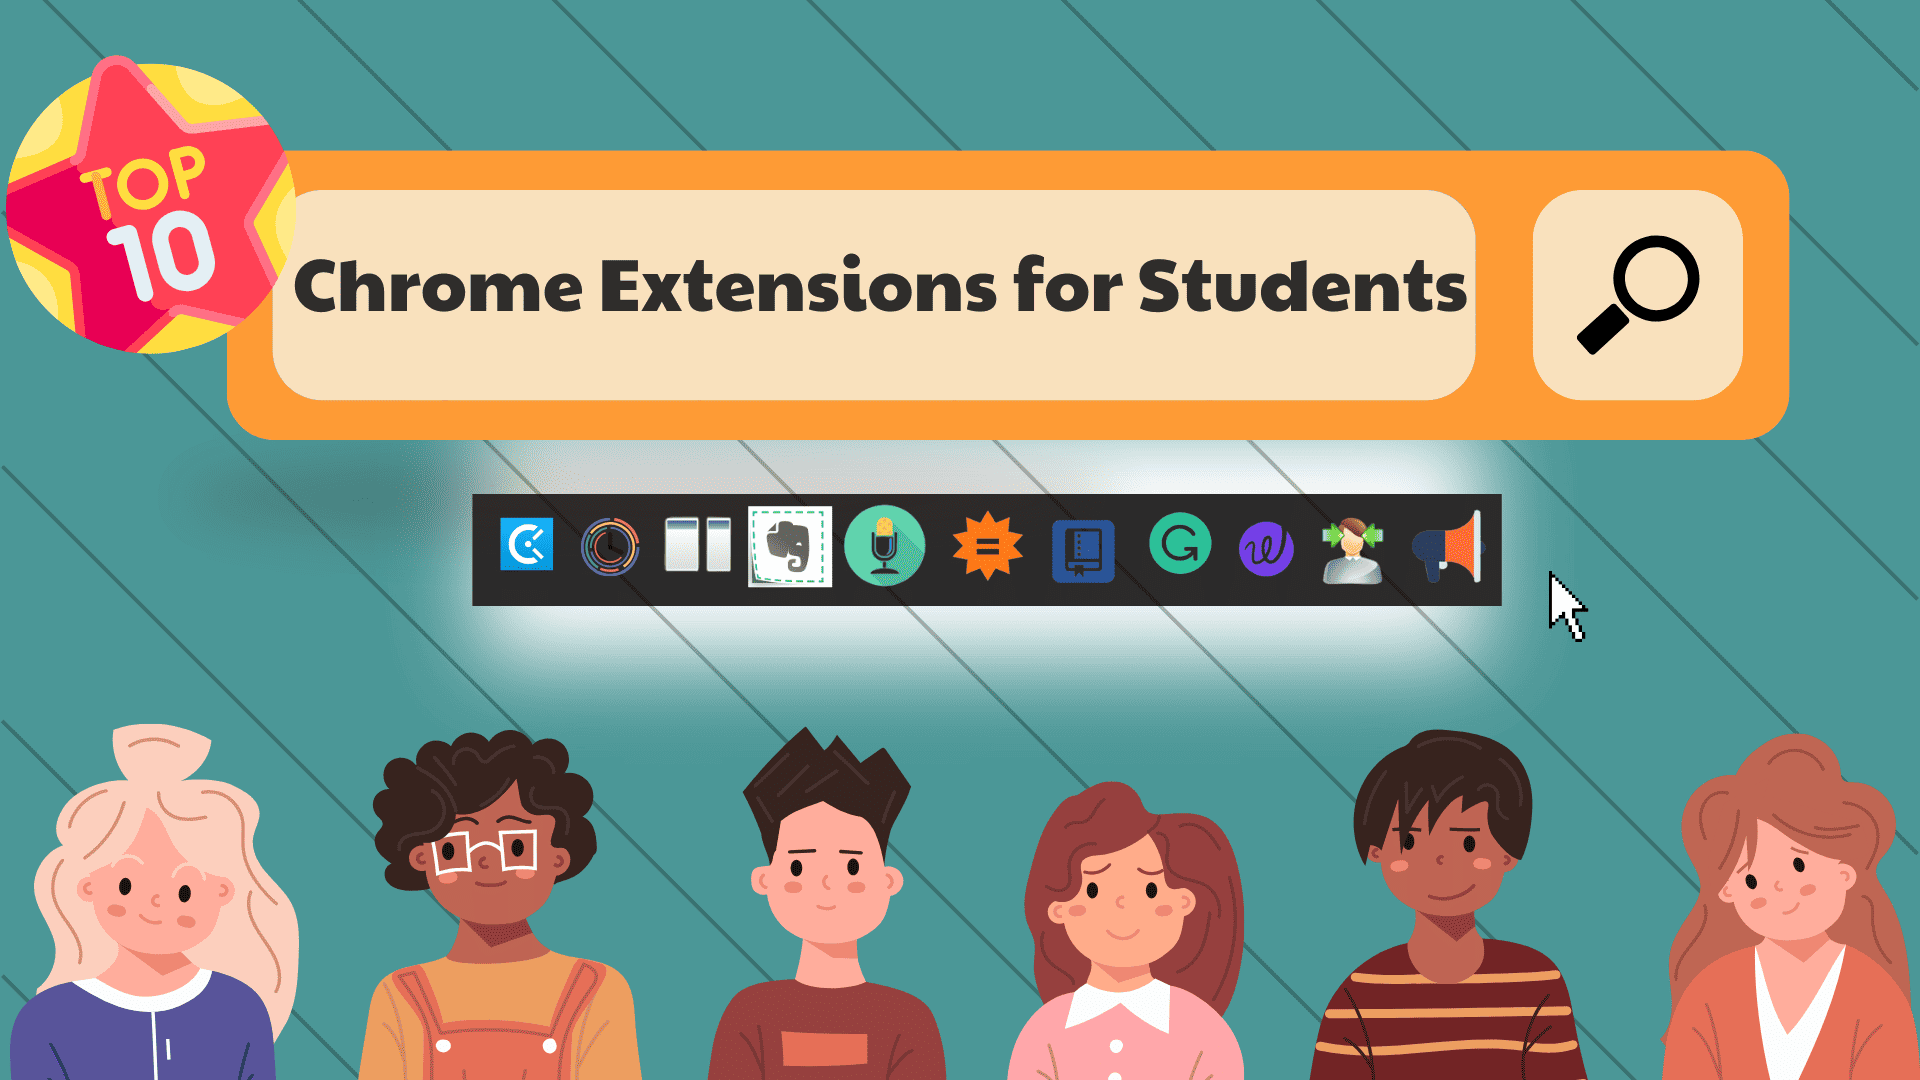 Chrome Extensions for Students